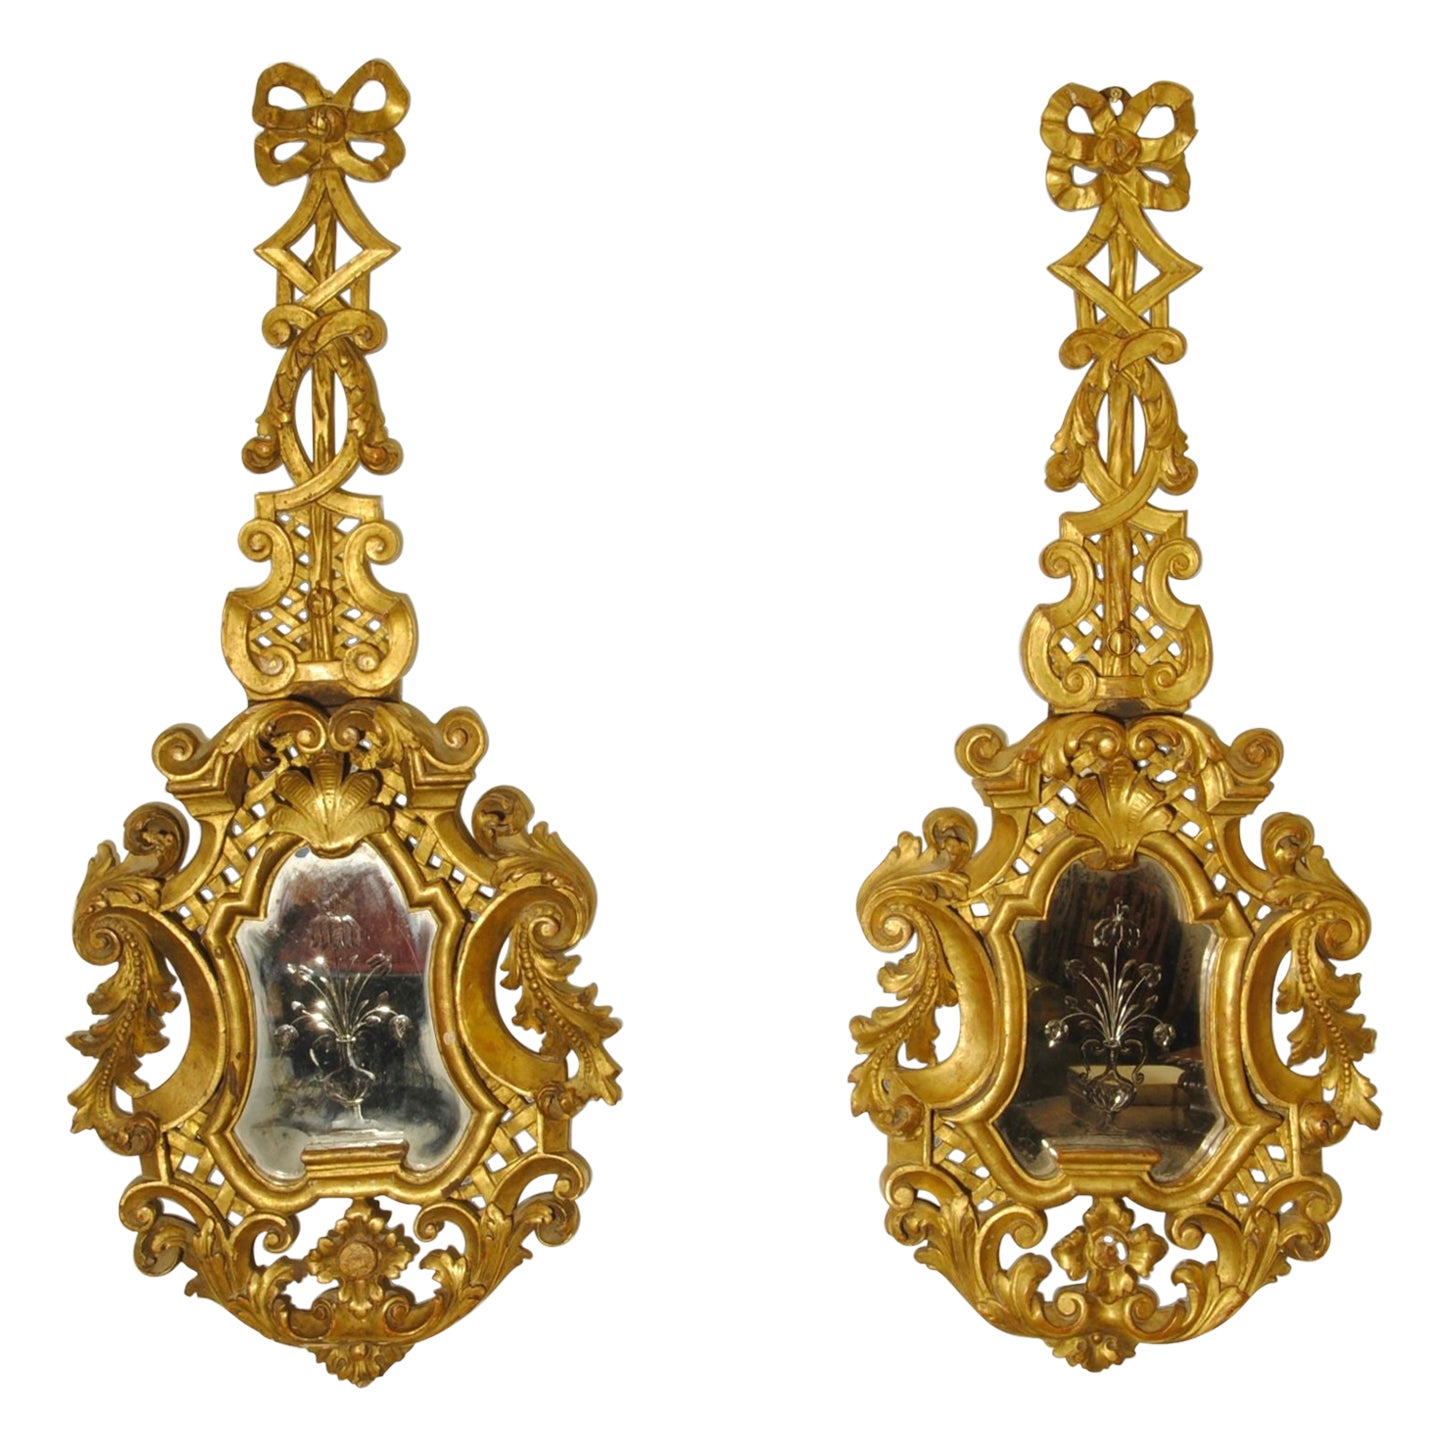 A Pair of 19th Century Italian Giltwood Mirrors For Sale